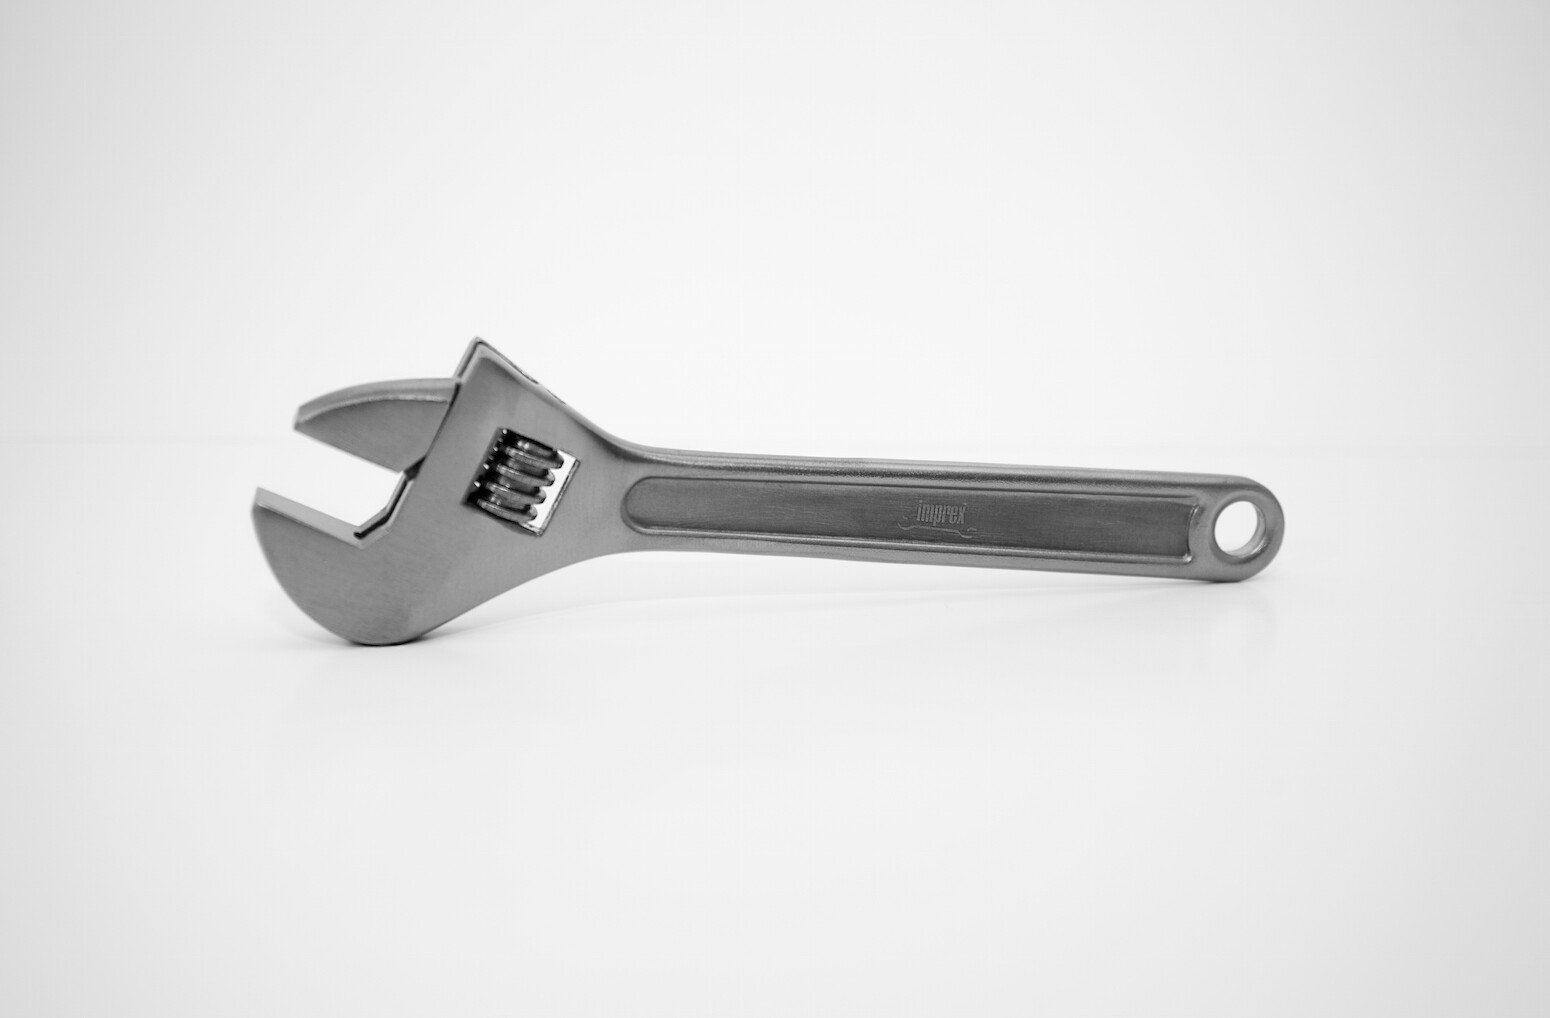 ITL 8-inch Adjustable Spanner/Wrench